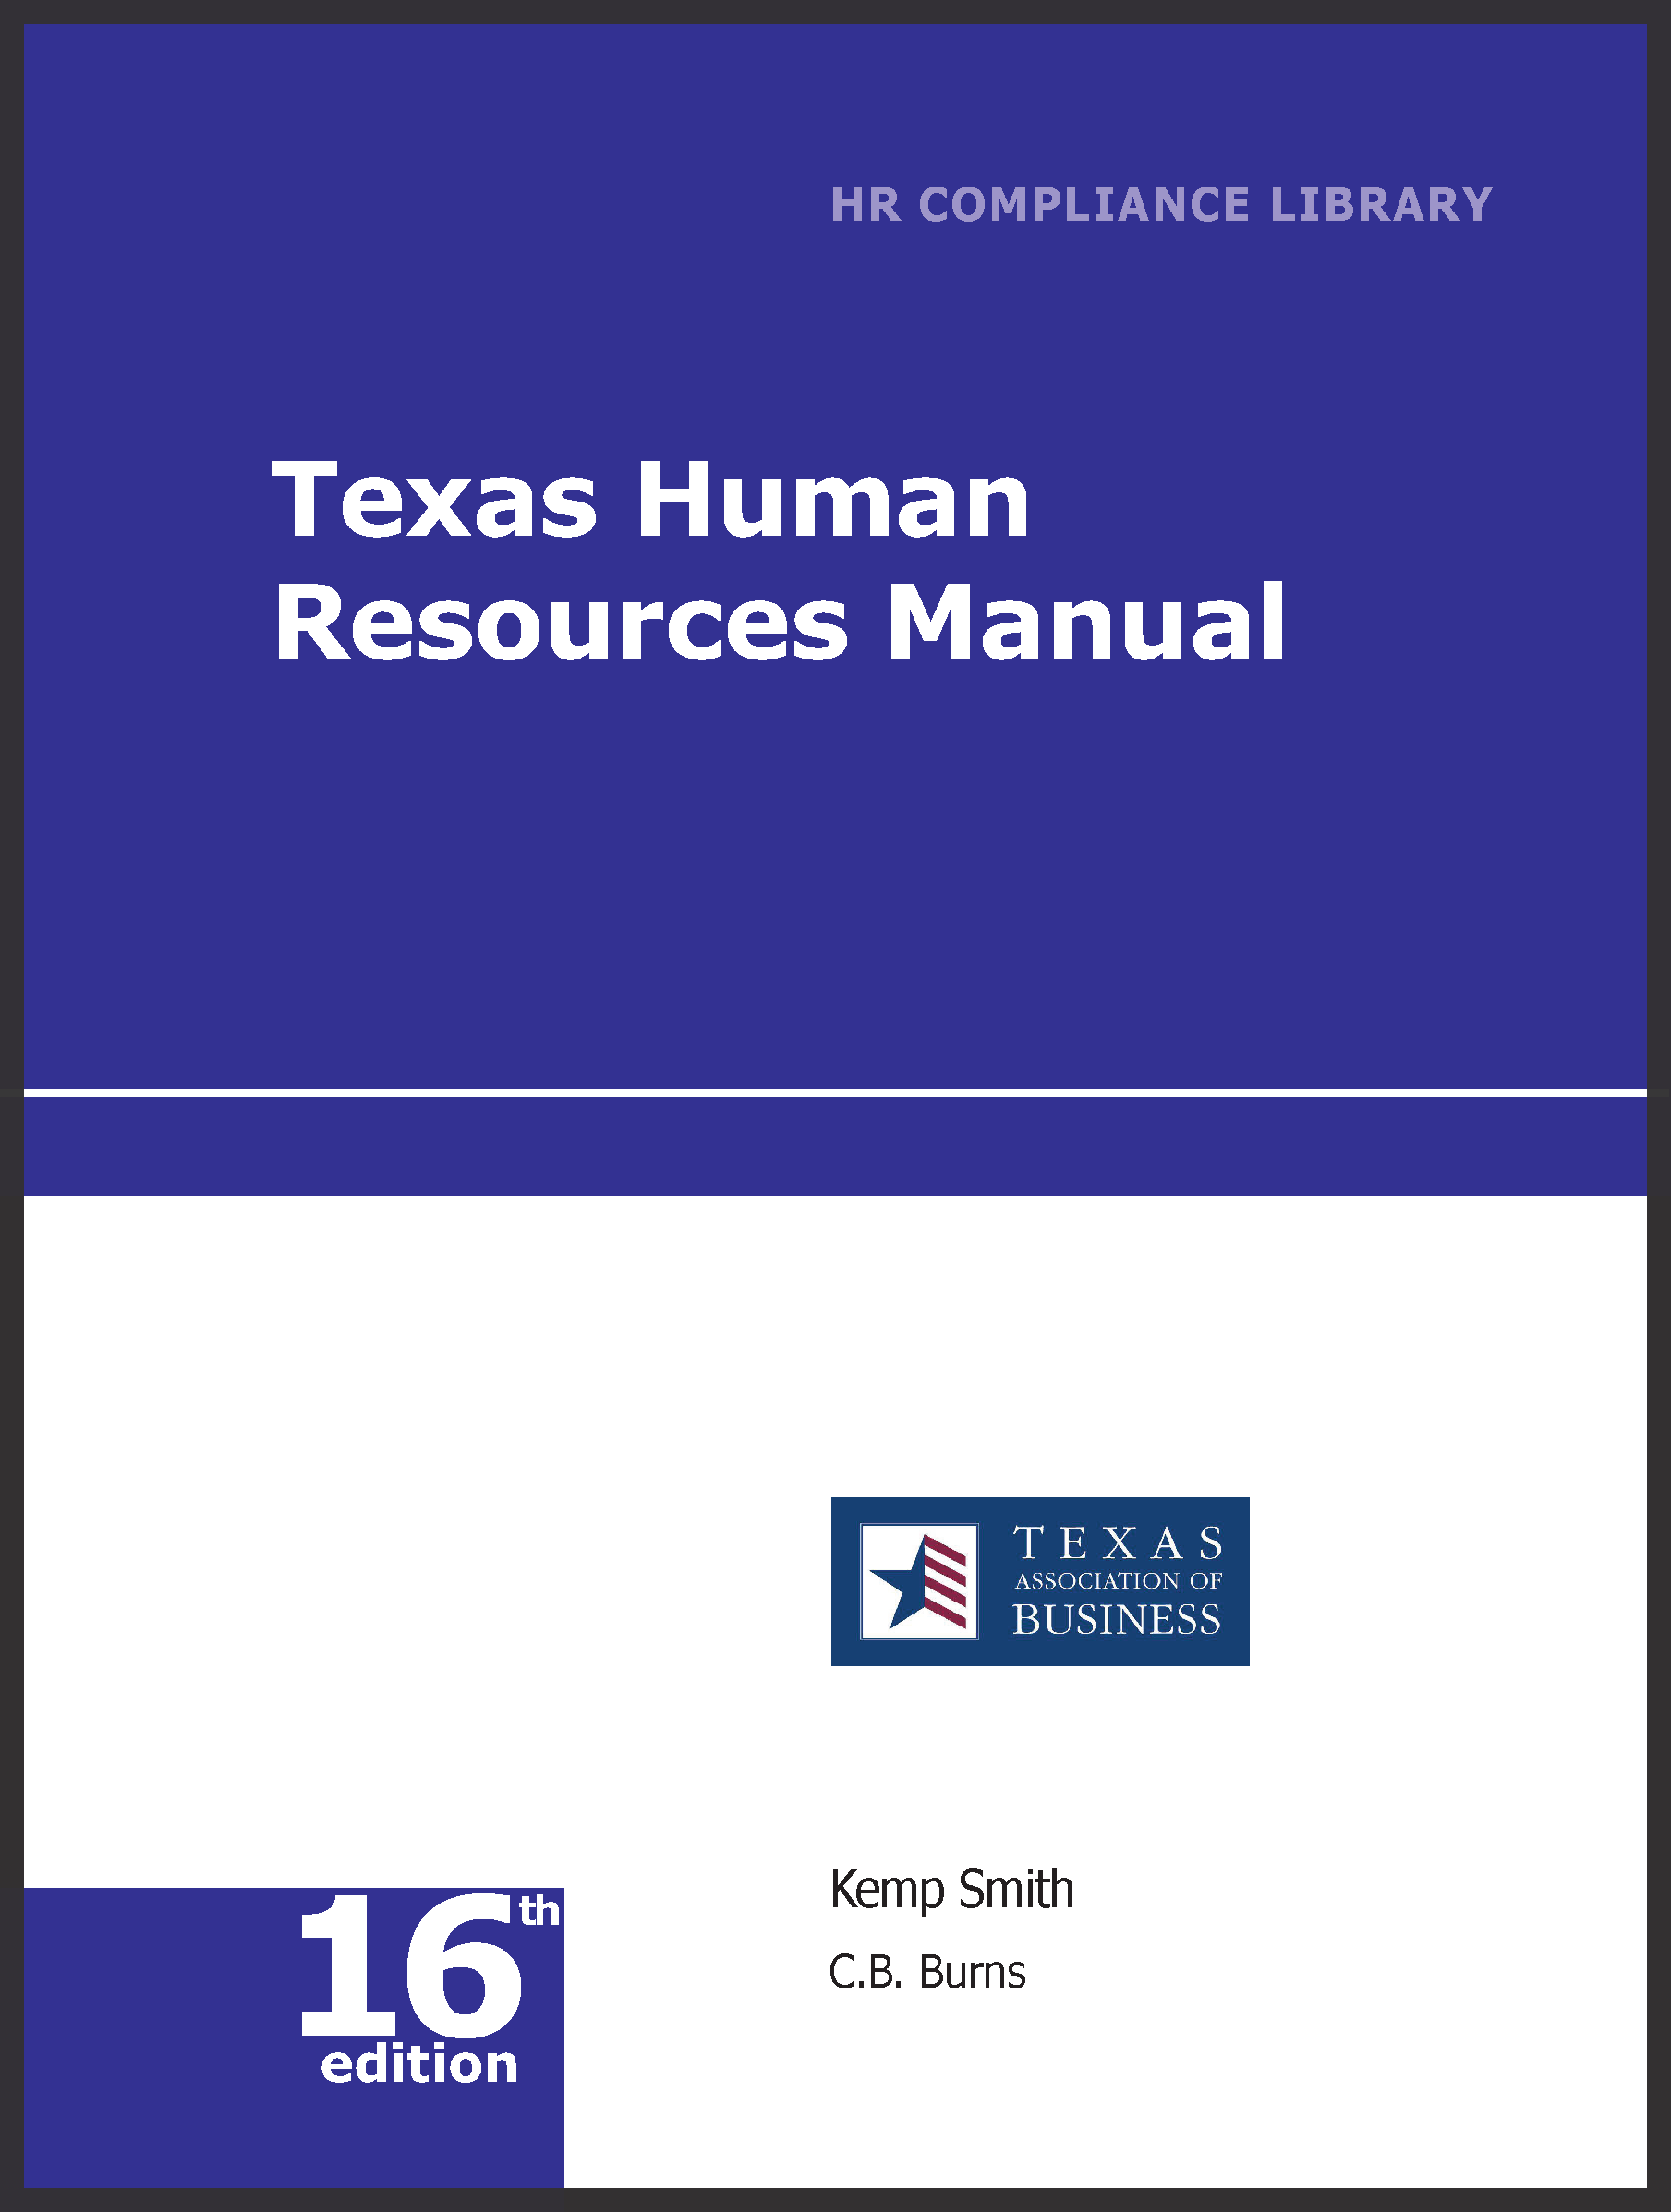 Texas Human Resources Library  employment law image, remote work, labor laws, employment laws, right to work, order of protection, minimum wage